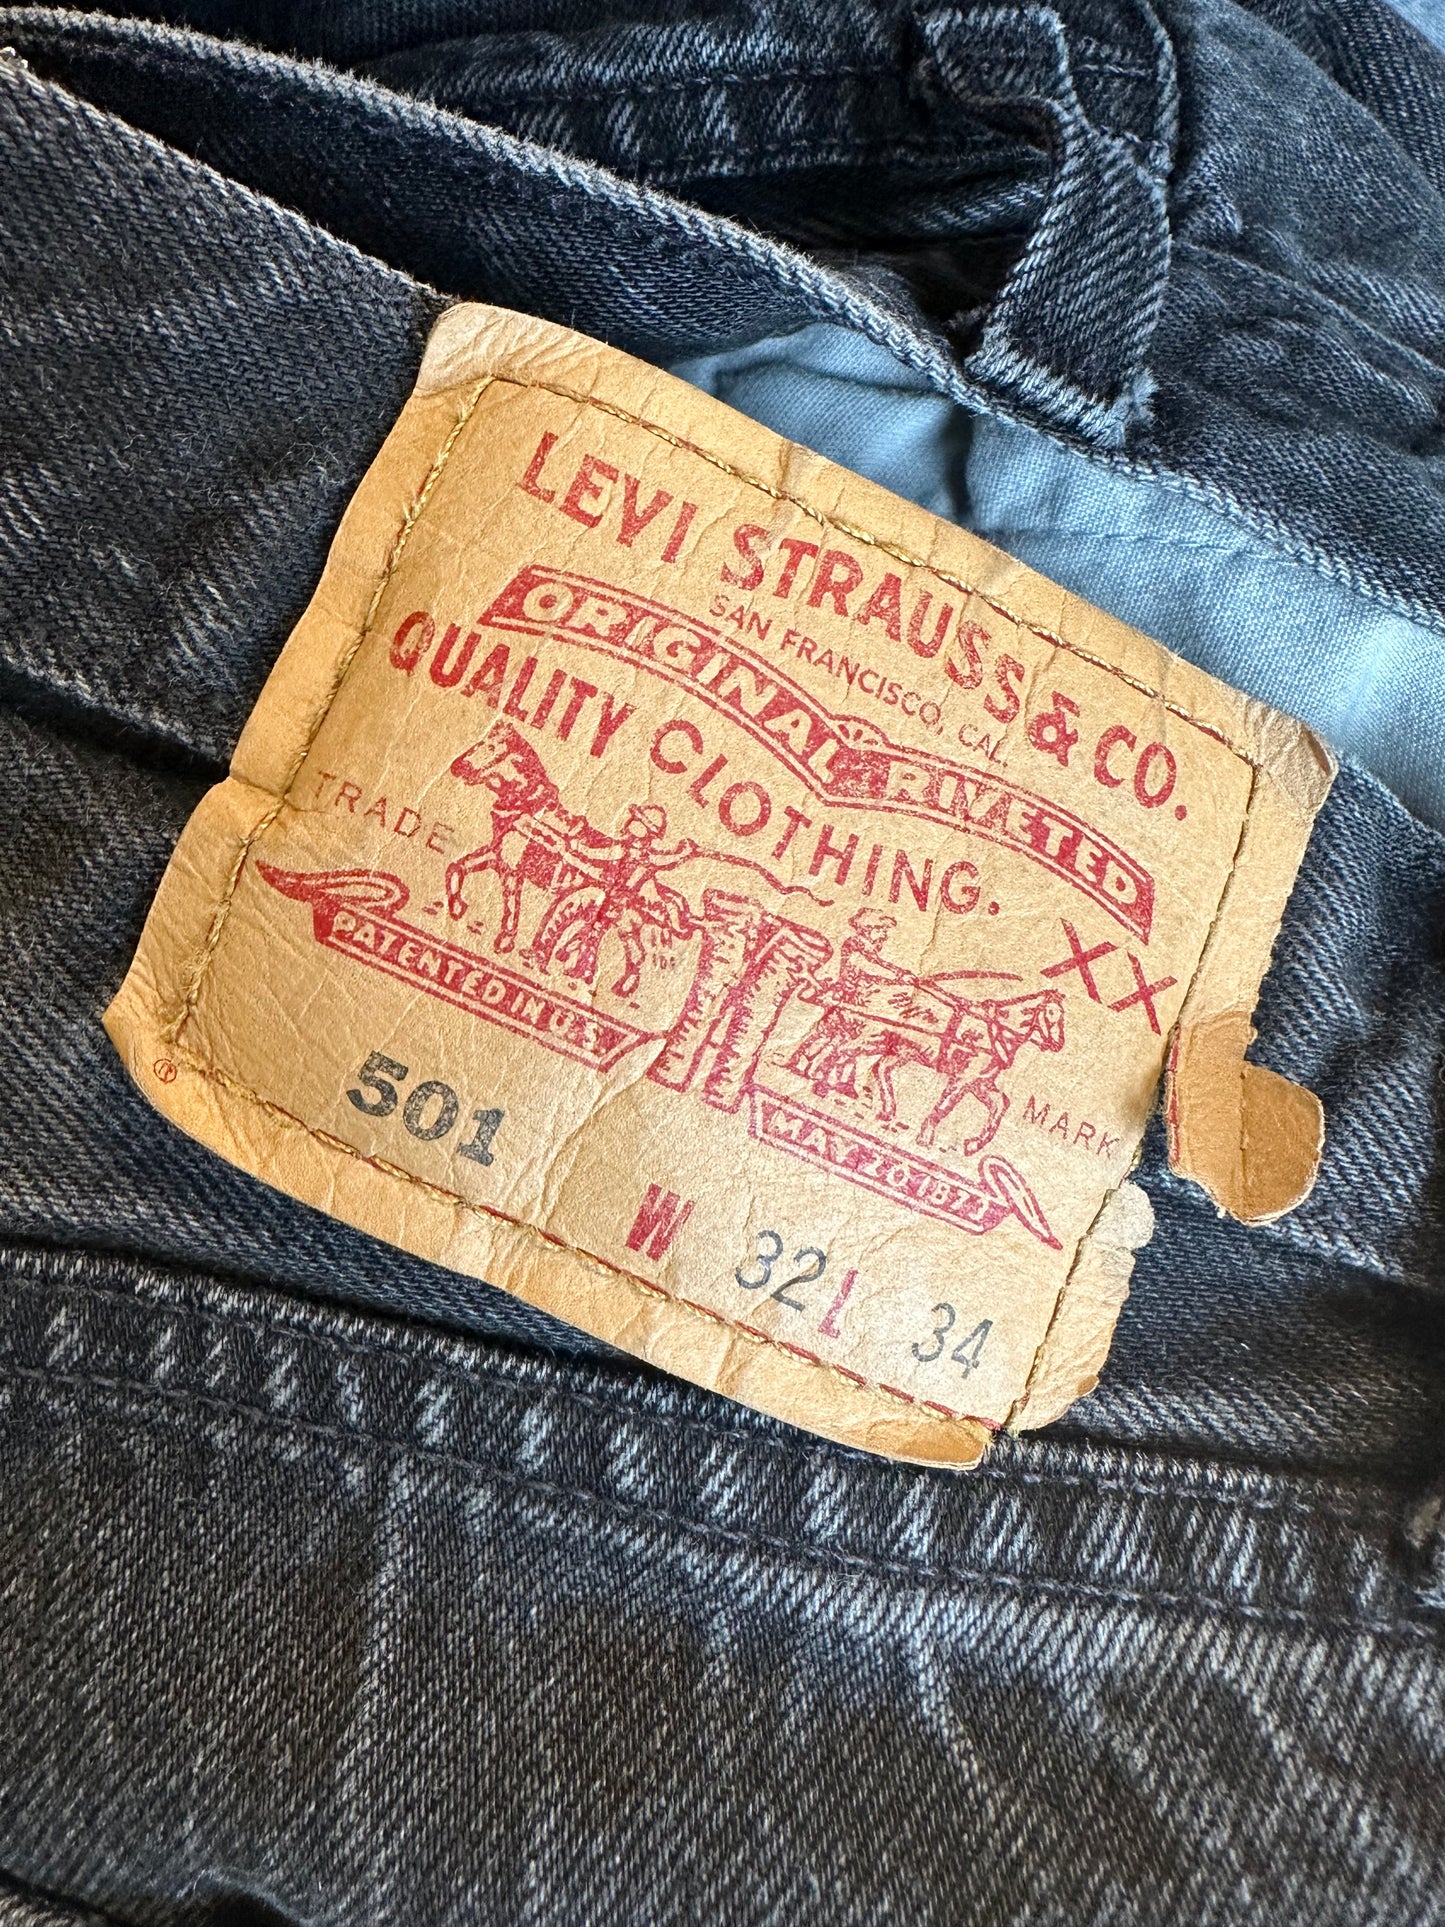 90s 'Levis' 501 Dark Wash Jeans / Made in Canada / 31"